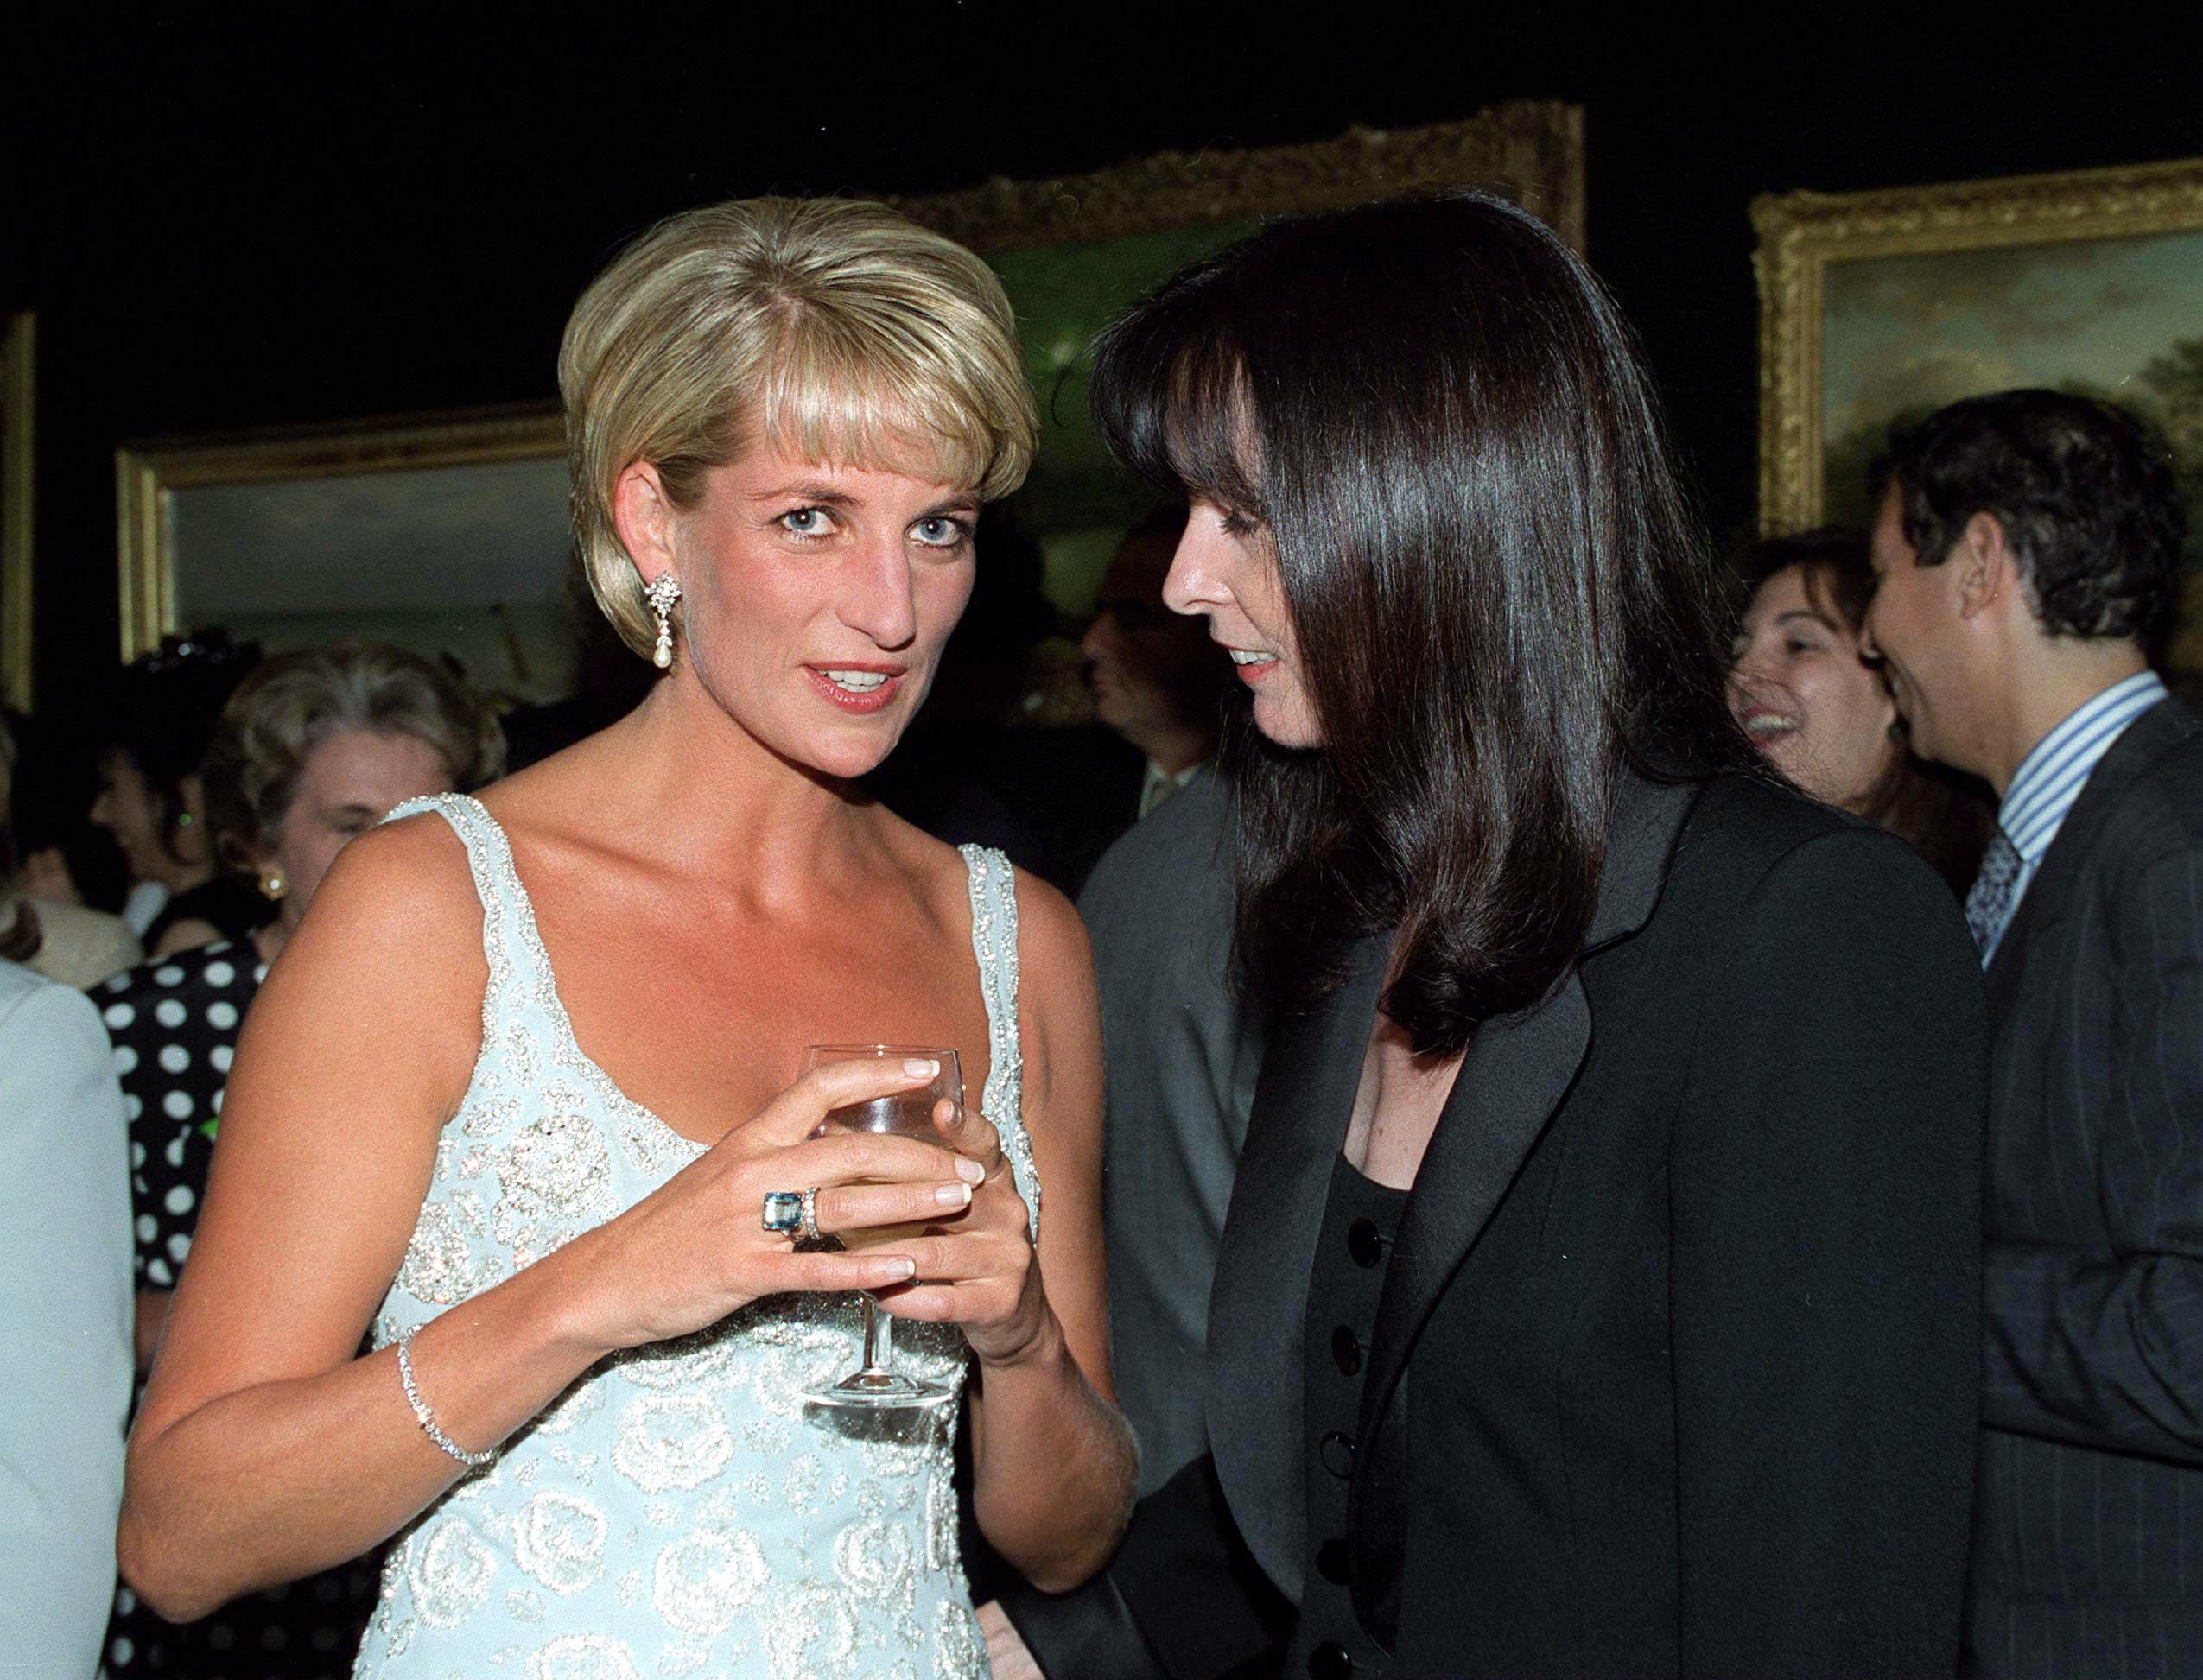 Princess Diana and her dress designer friend Catherine Walker at a private viewing and reception on June 2, 1997 | Source: Getty Images